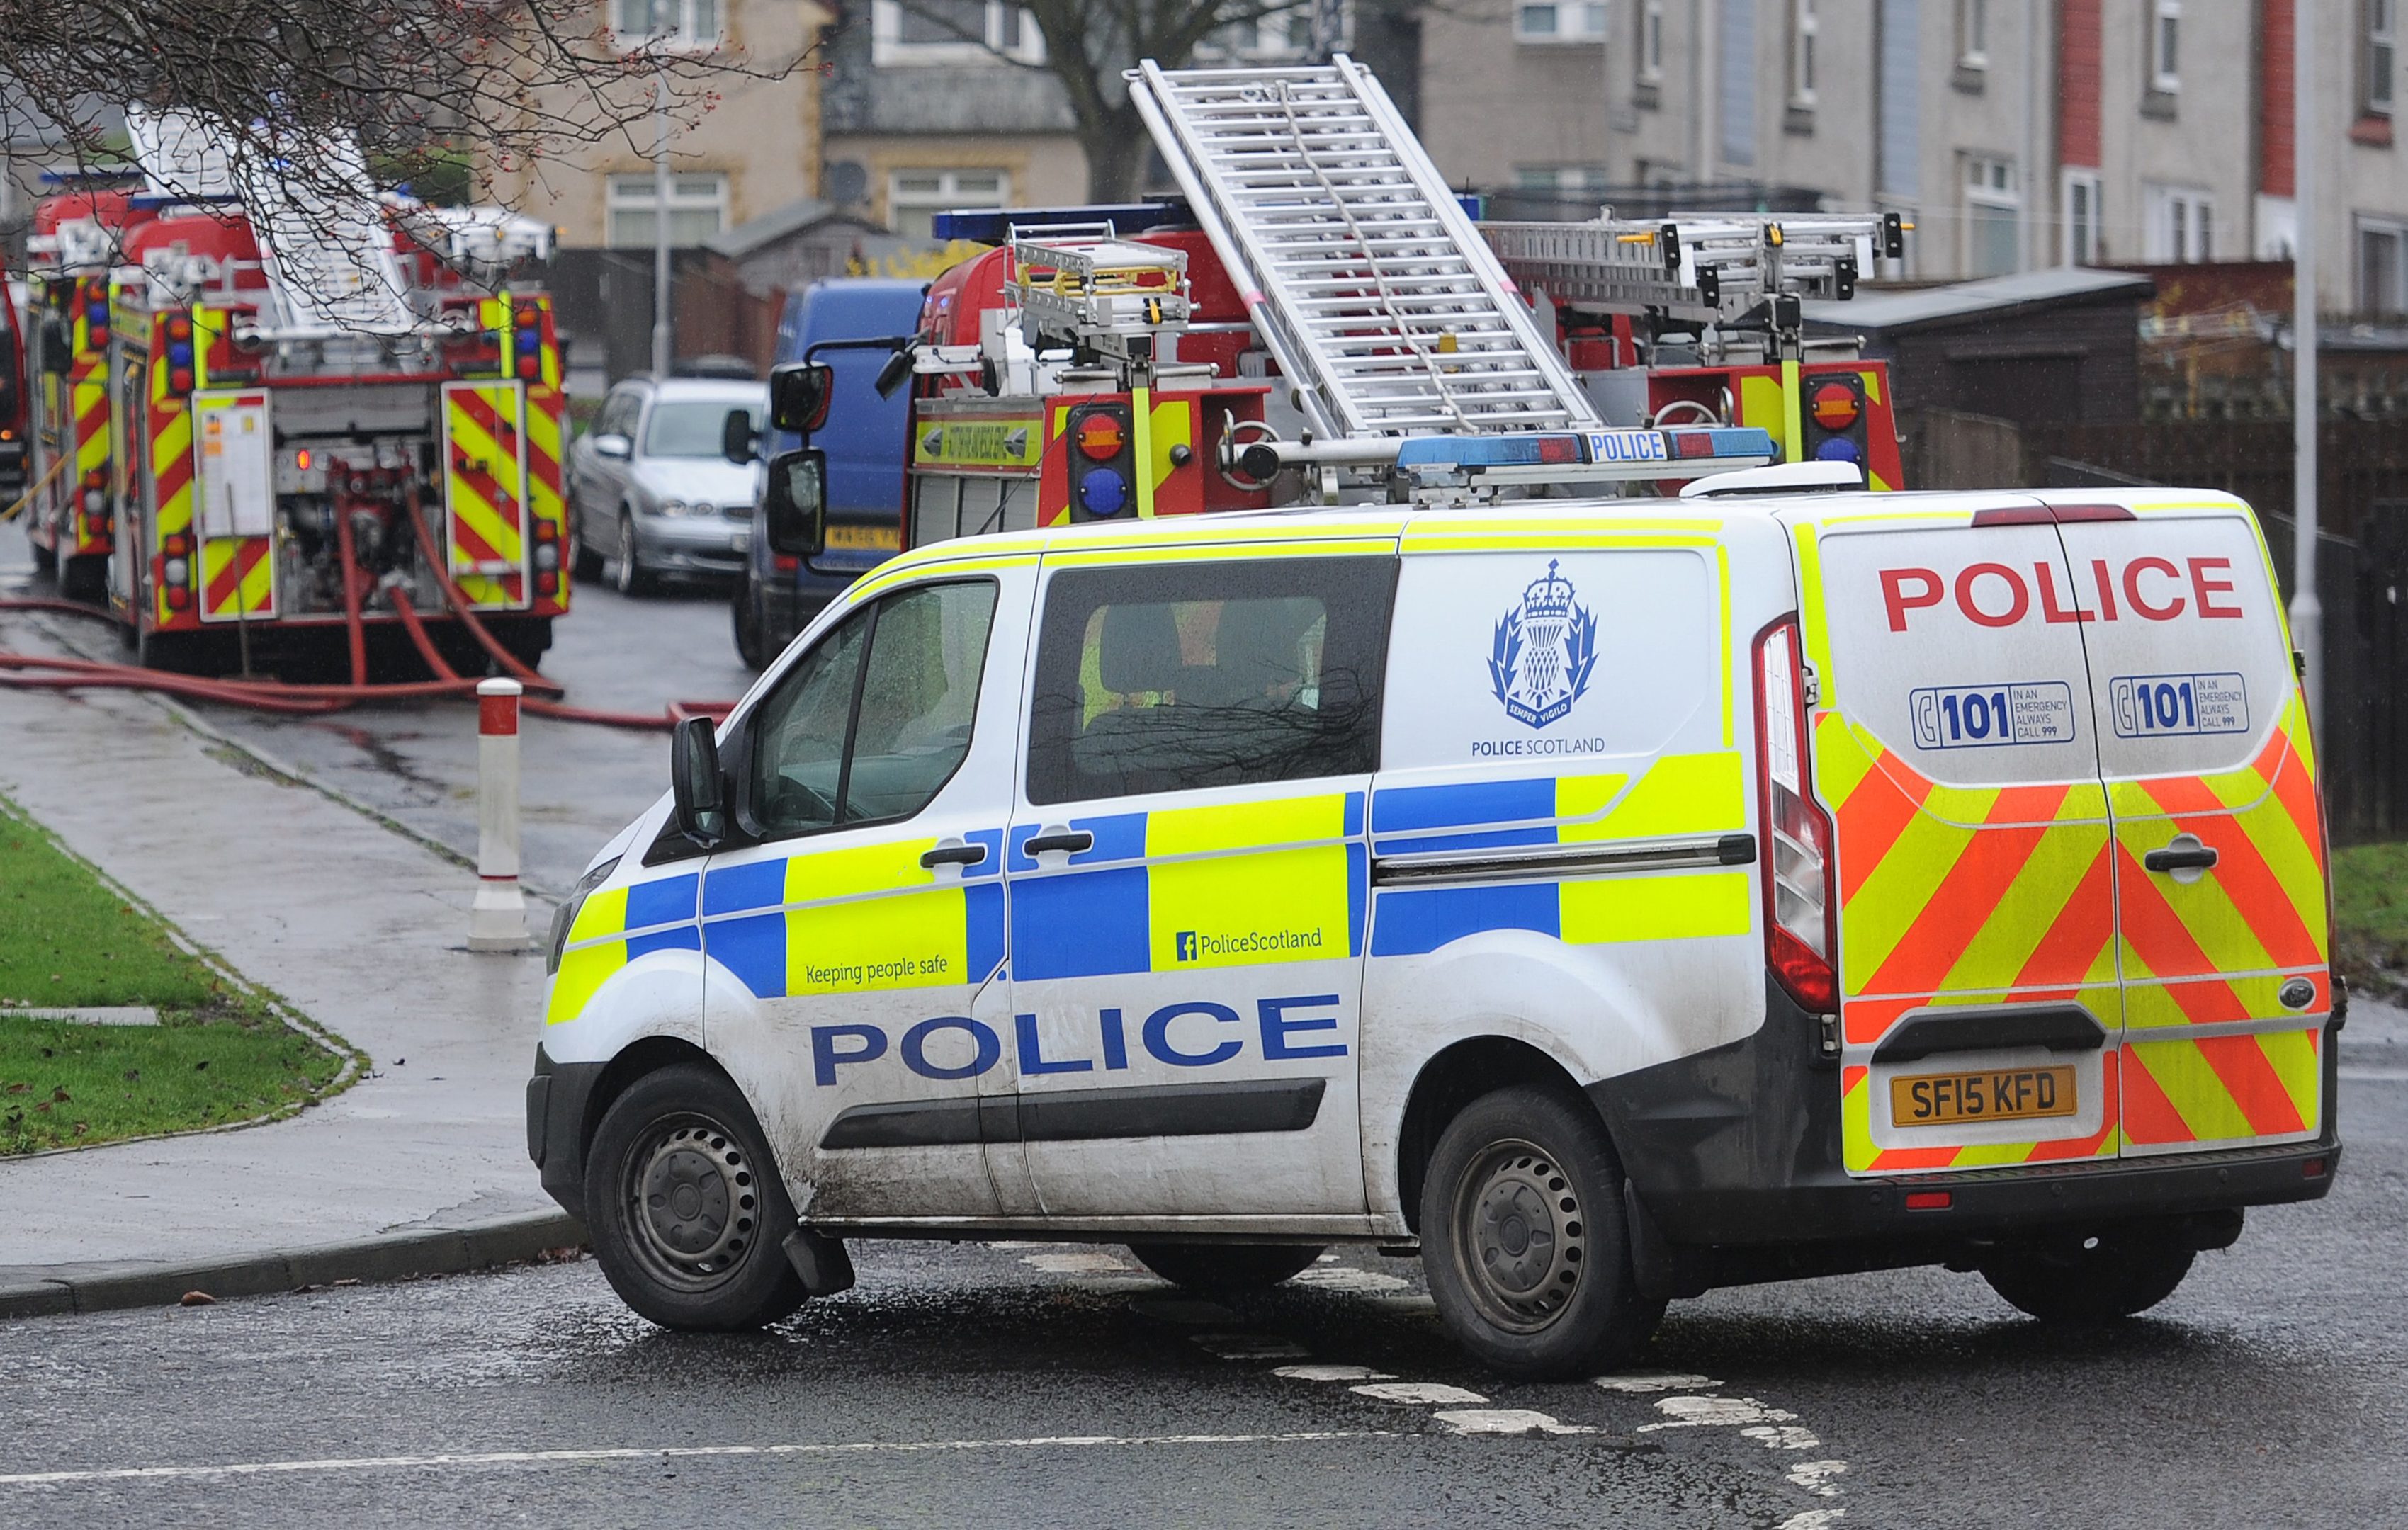 Emergency services were called into action in Rosyth when one of the sheltered housing complex properties in Walter Hay Court was seen to be on fire.